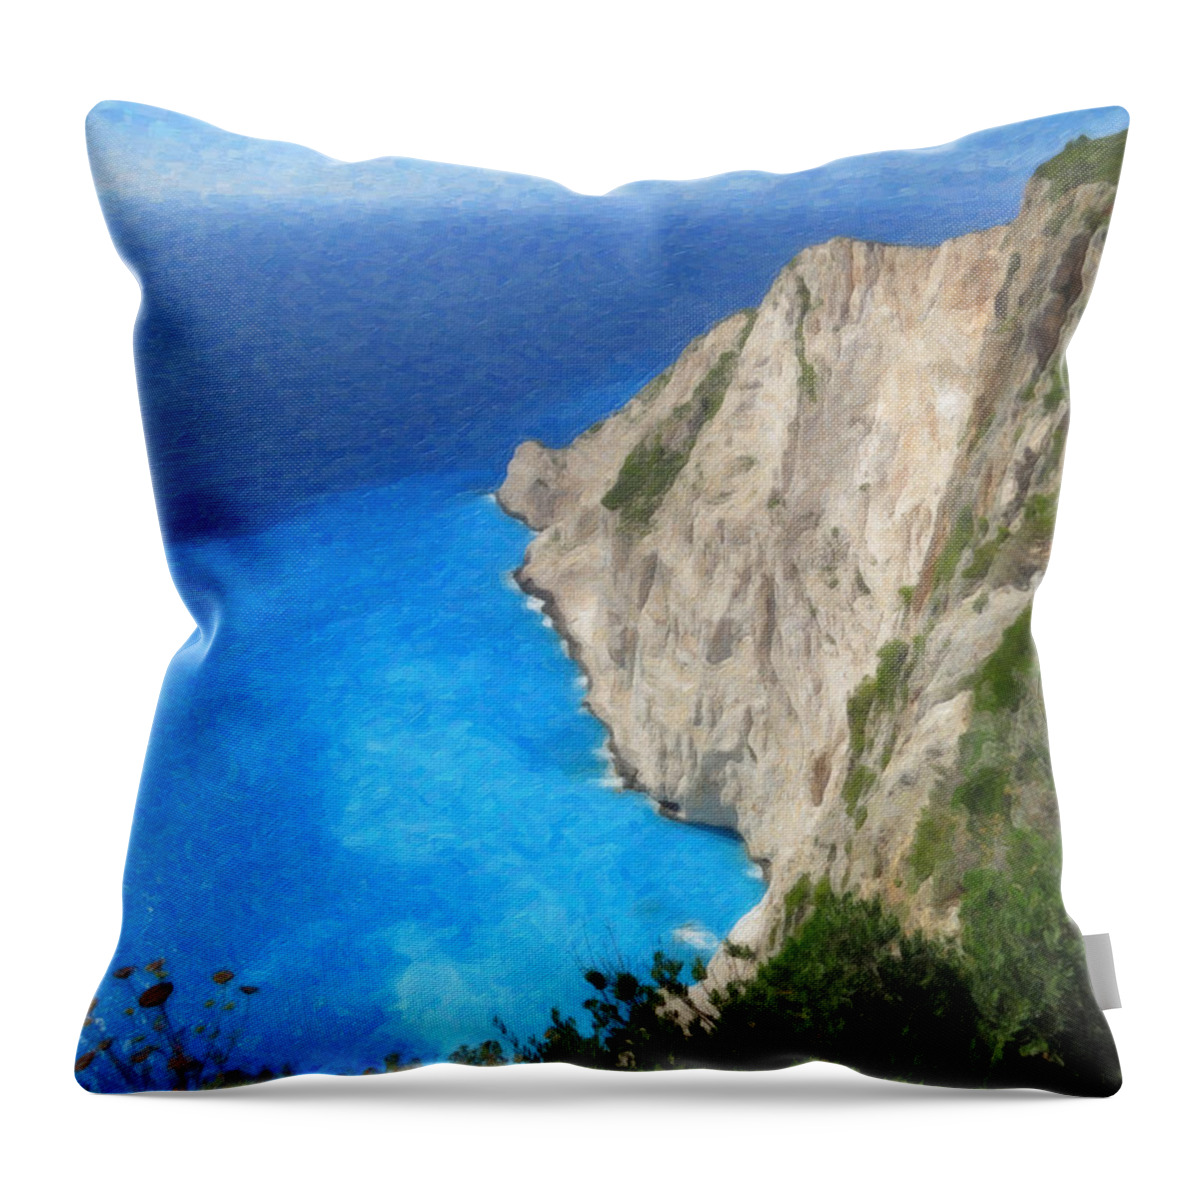 Landscape Sea Throw Pillow featuring the painting Greek Coast Grk4188 by Dean Wittle